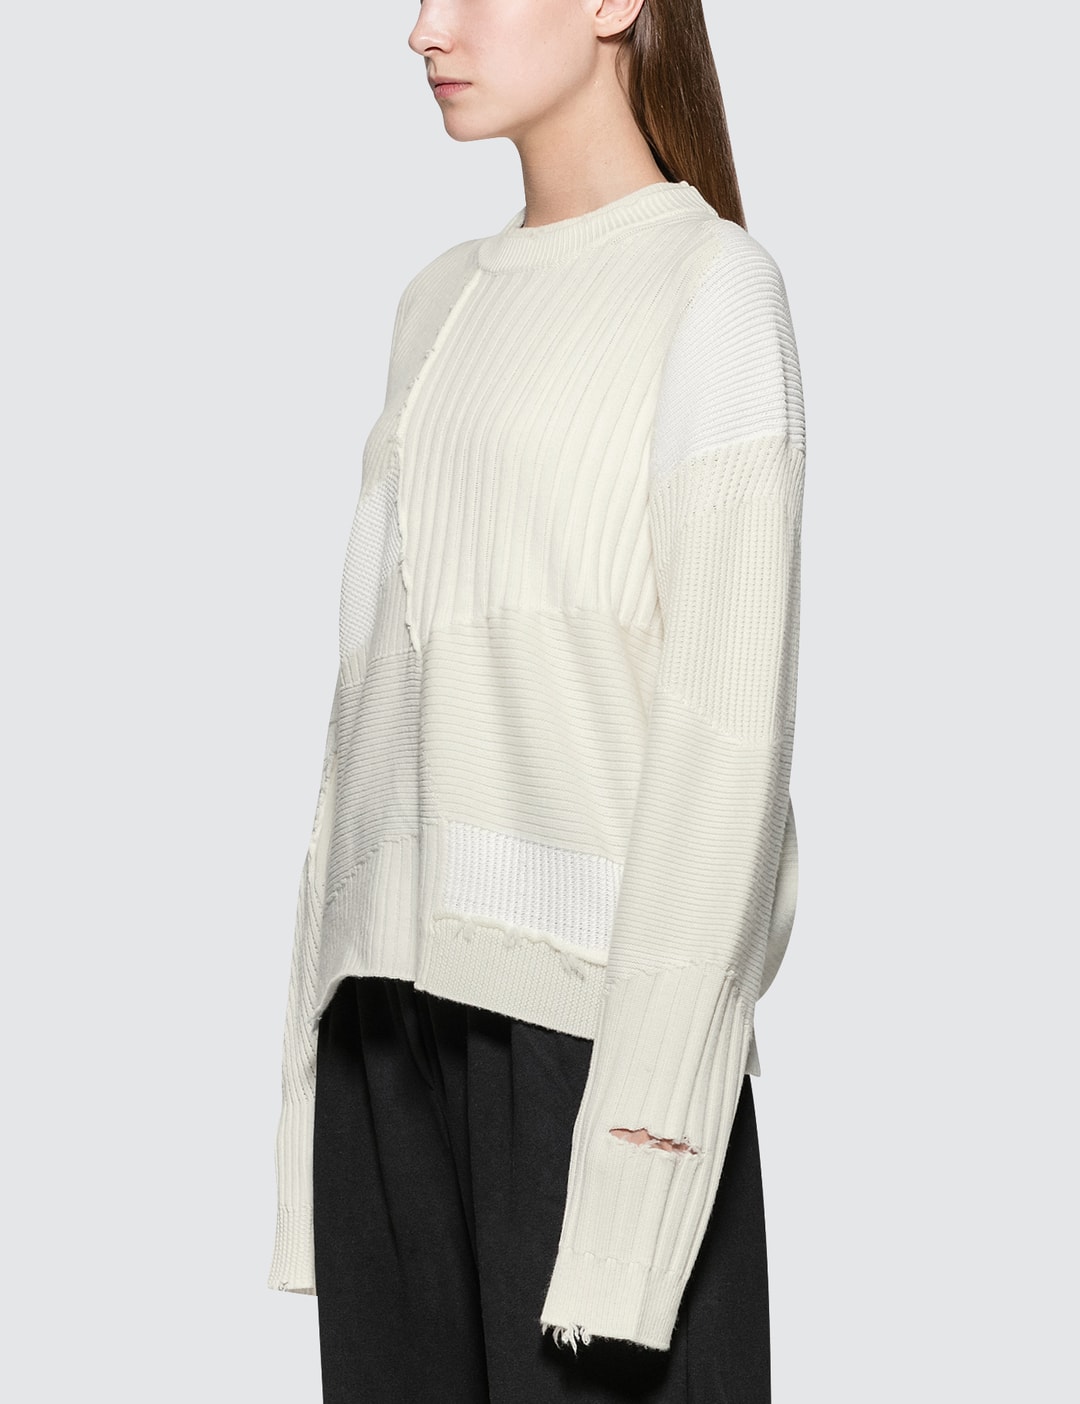 Helmut Lang - Military Grunge Oversized Crew | HBX - Globally Curated ...